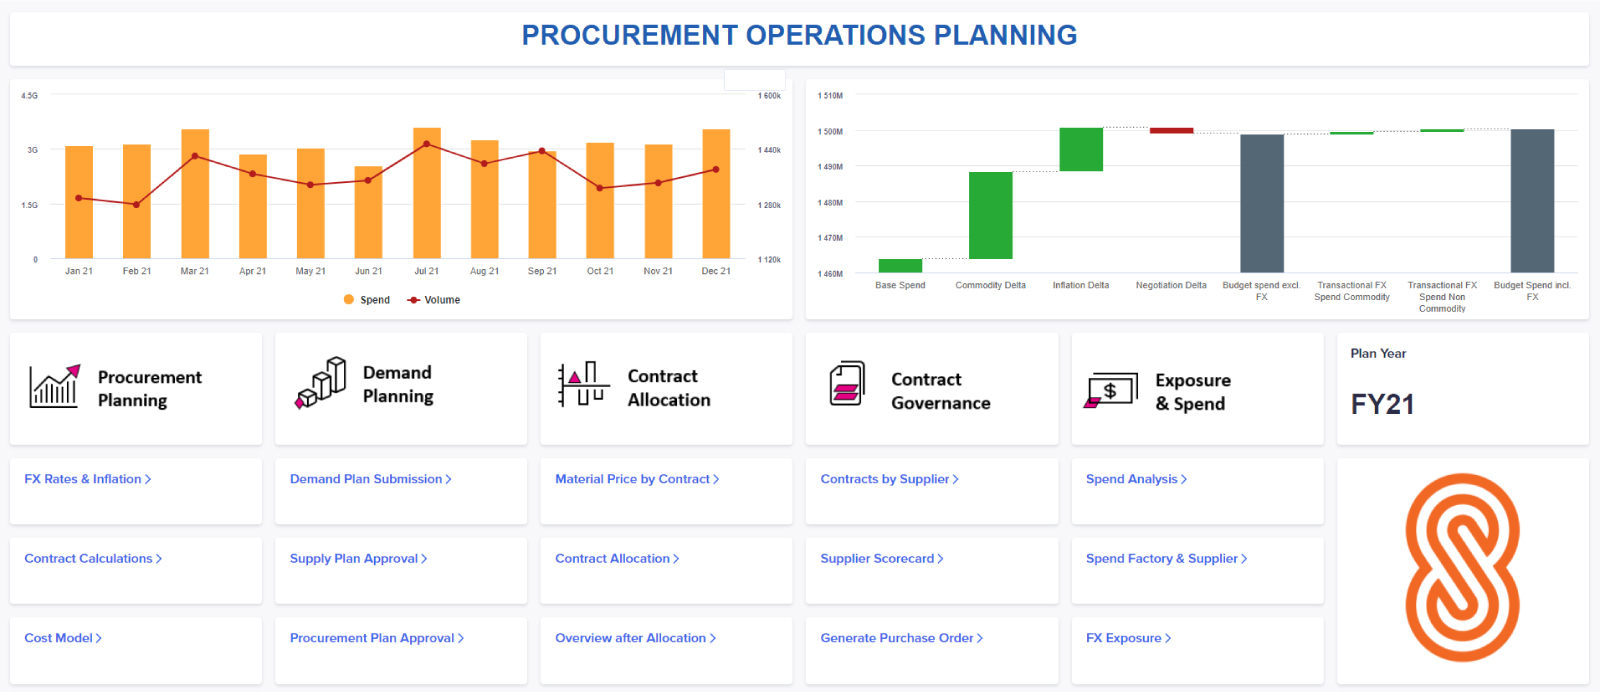 Procurement operations planning chart for FY22